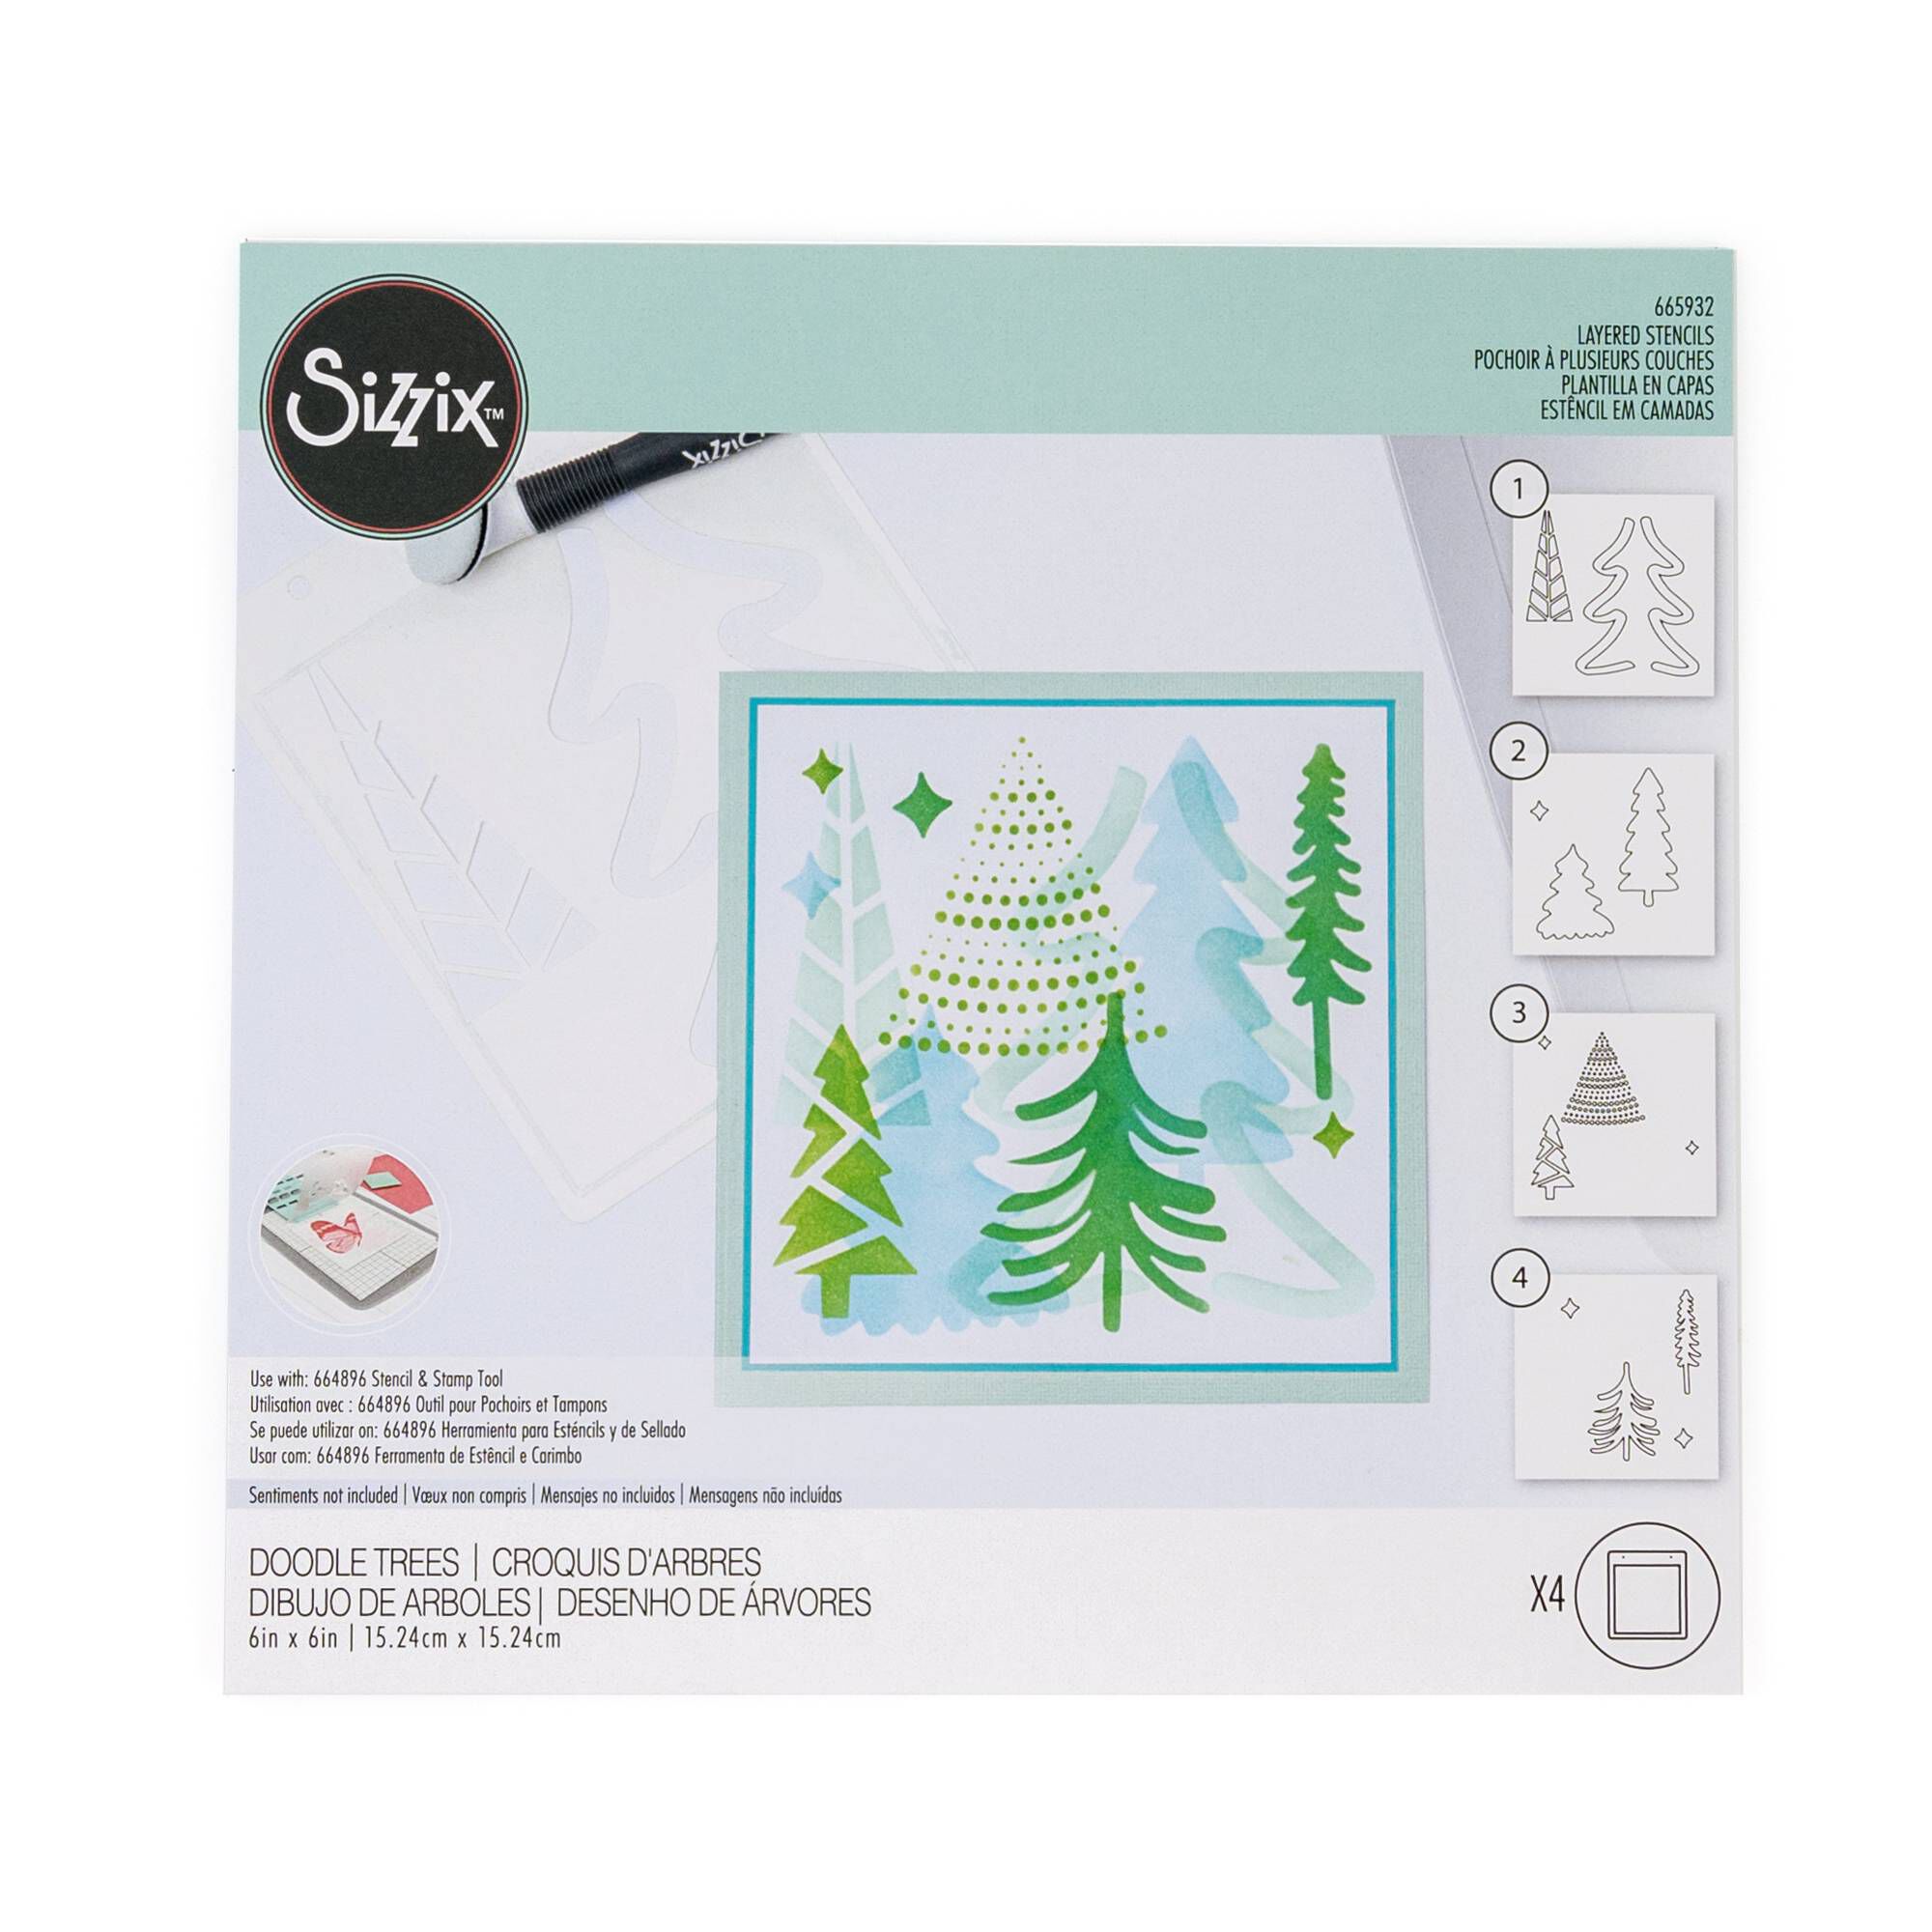 Sizzix Doodle Trees Layered Stencil Set 4 Pack | Hobbycraft